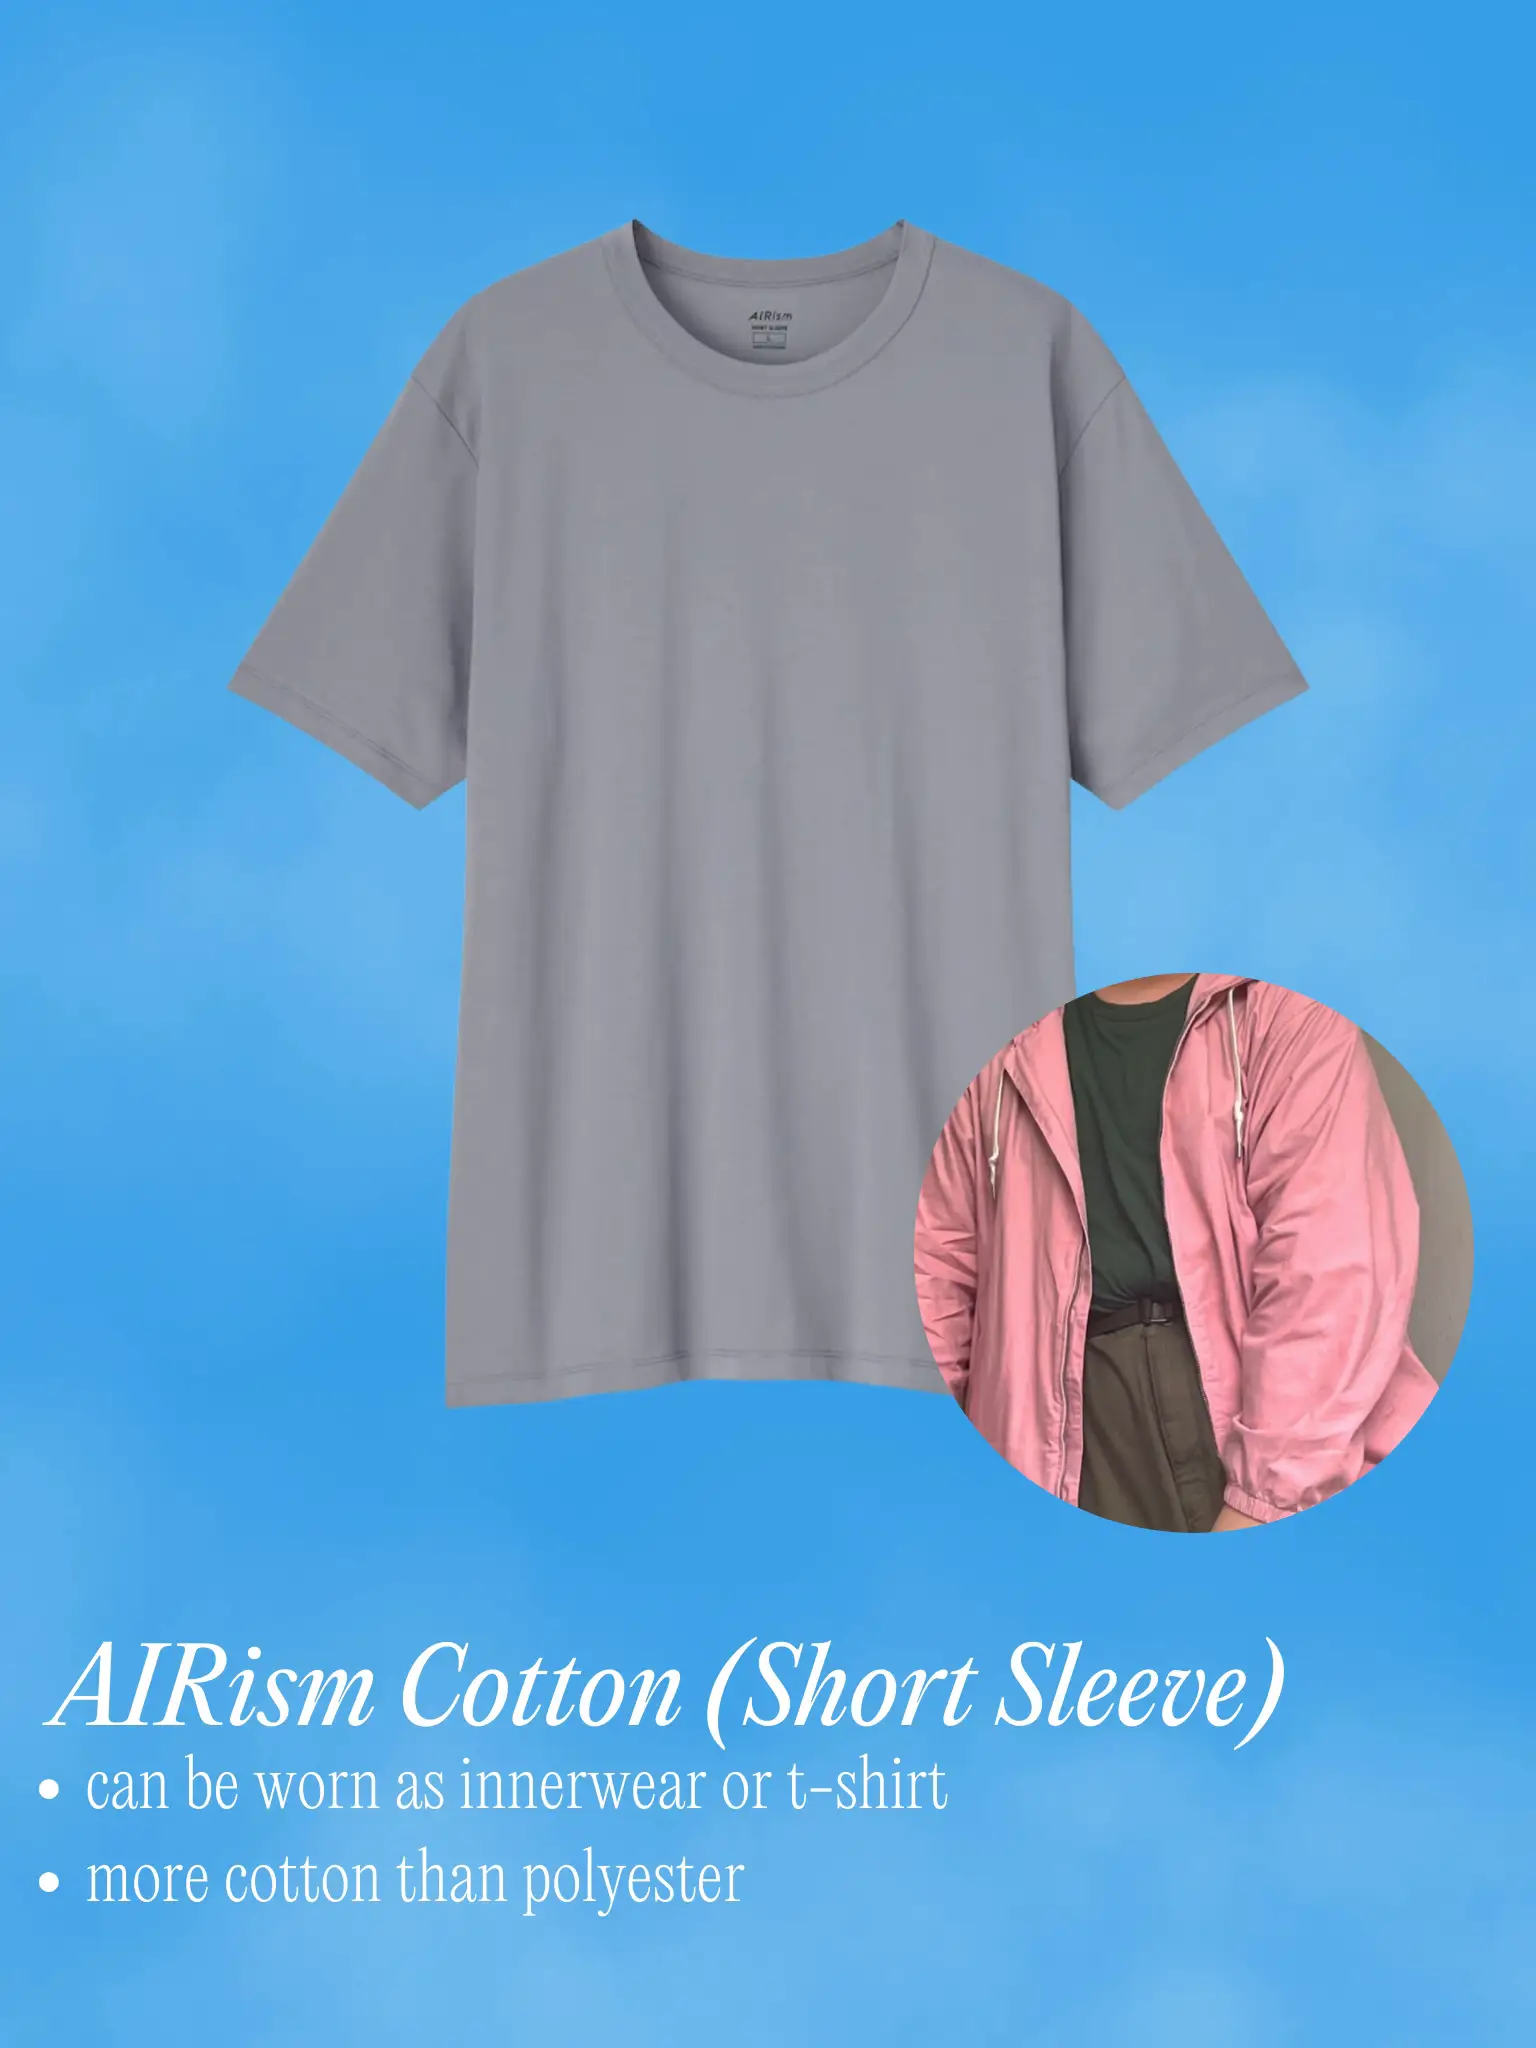 Different Types of AIRism T-shirts